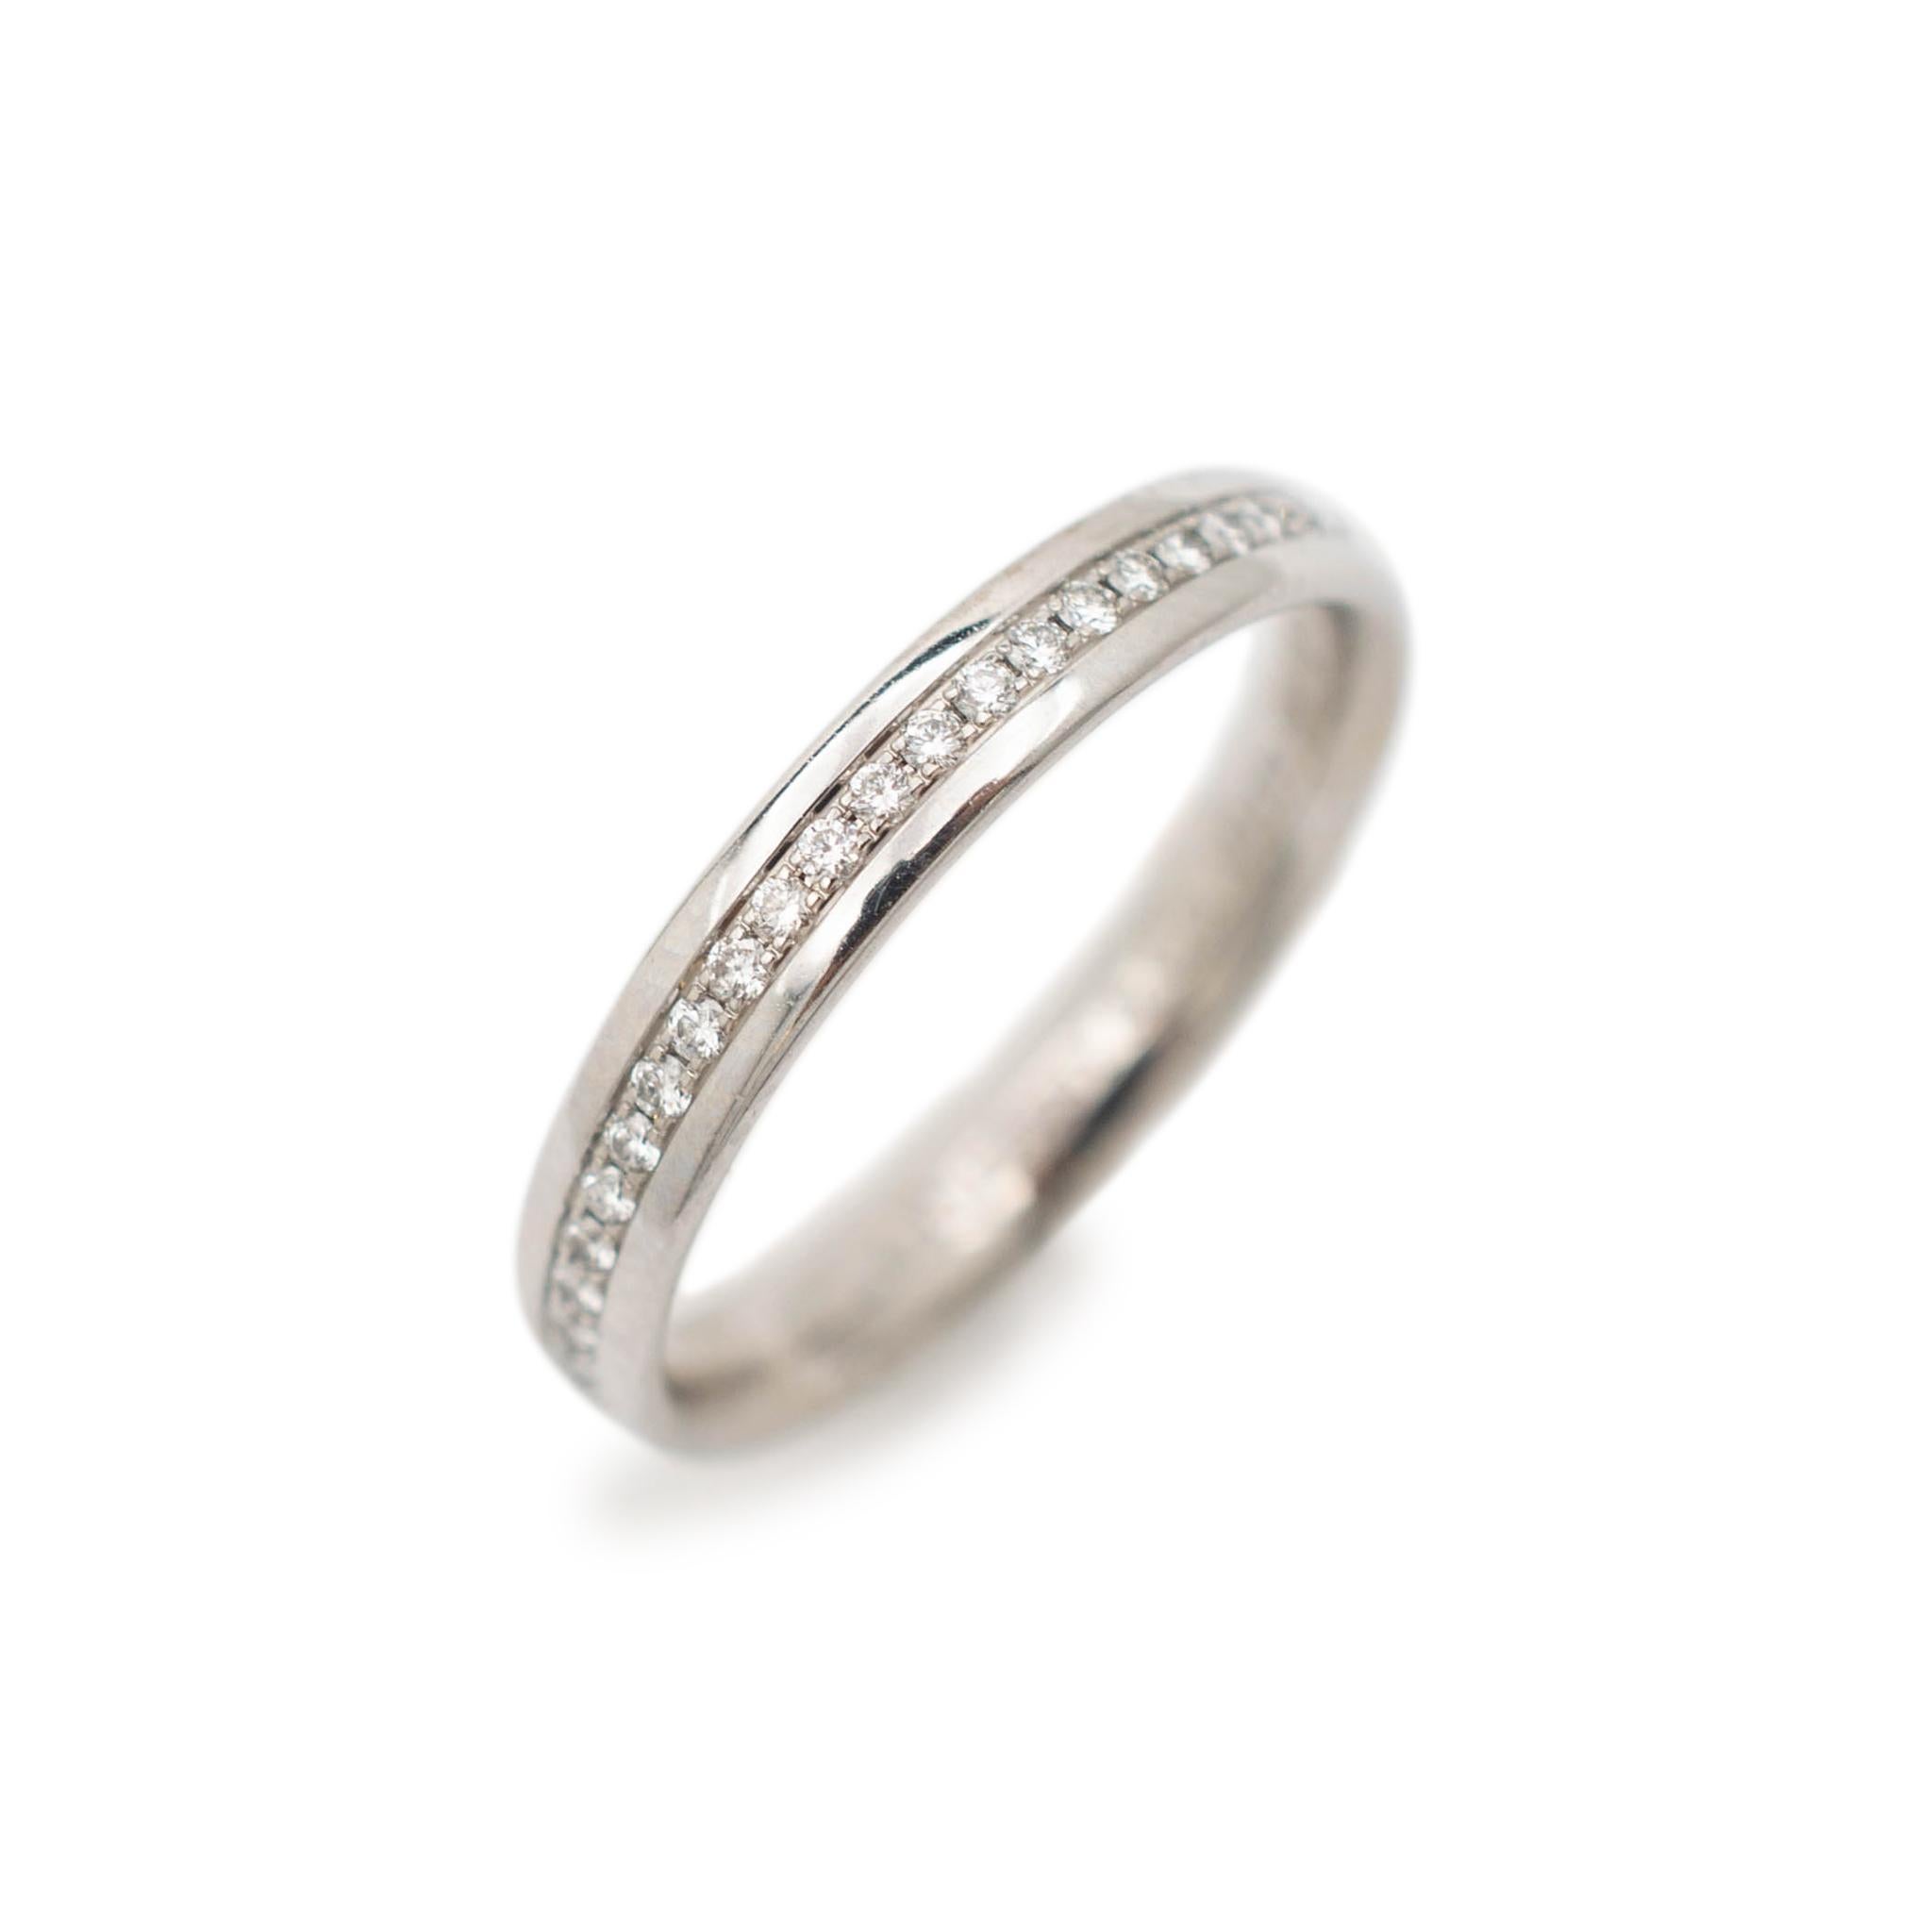 Brand: Tiffany & Co. 

Gender: Ladies

Material: 18K White Gold

Size: 6

Shank Width: 0.34 mm

Weight: 2.84 Grams

Ladies 18K white gold diamond wedding band with a half-round shank.

Engraved with 